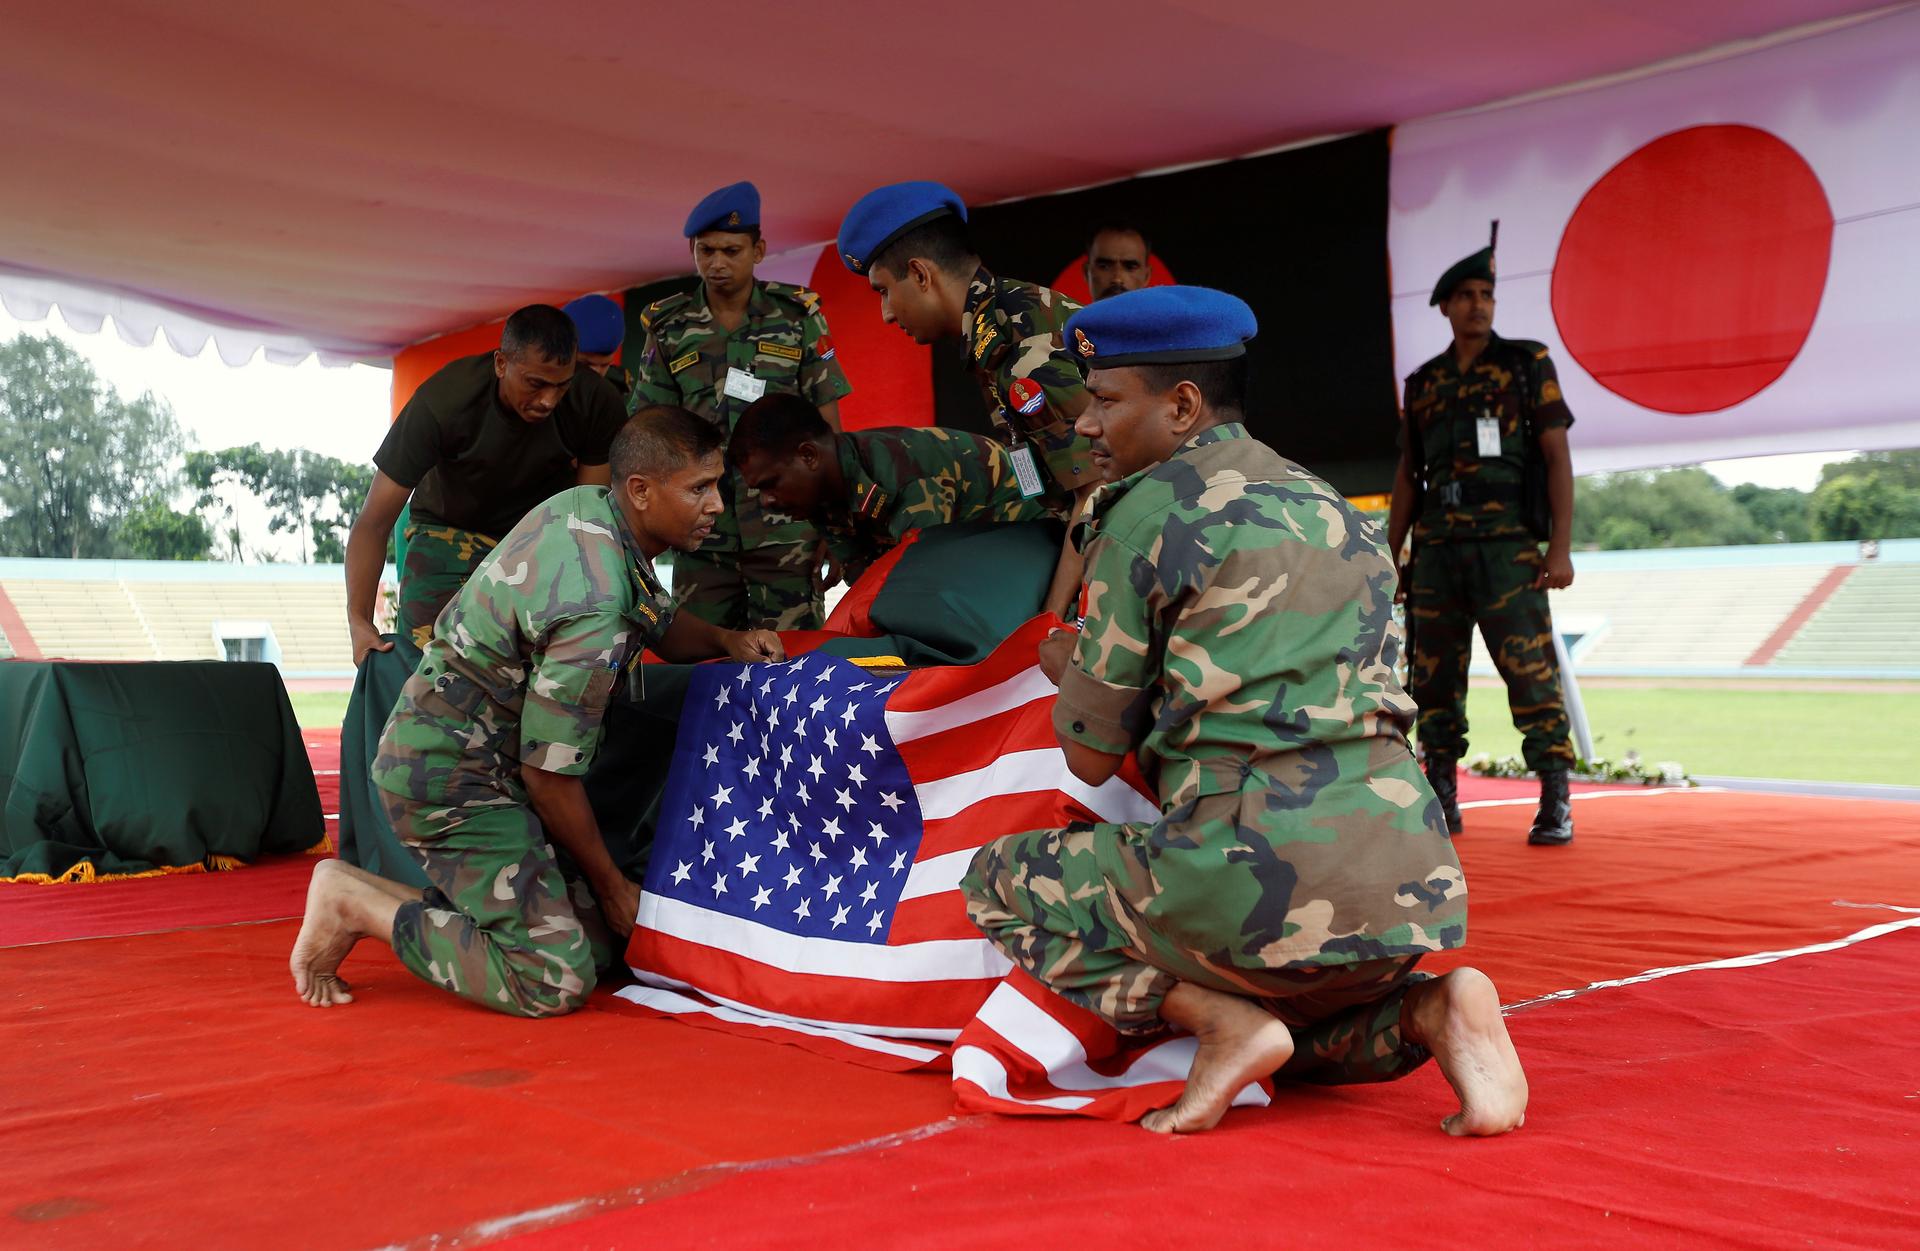 Bangladeshi army personnel place a U.S. flag on a coffin of a victim who was killed in the attack on the Holey Artisan Bakery and the O'Kitchen Restaurant, during a memorial ceremony in Dhaka, Bangladesh, July 4, 2016. REUTERS/Adnan Abidi